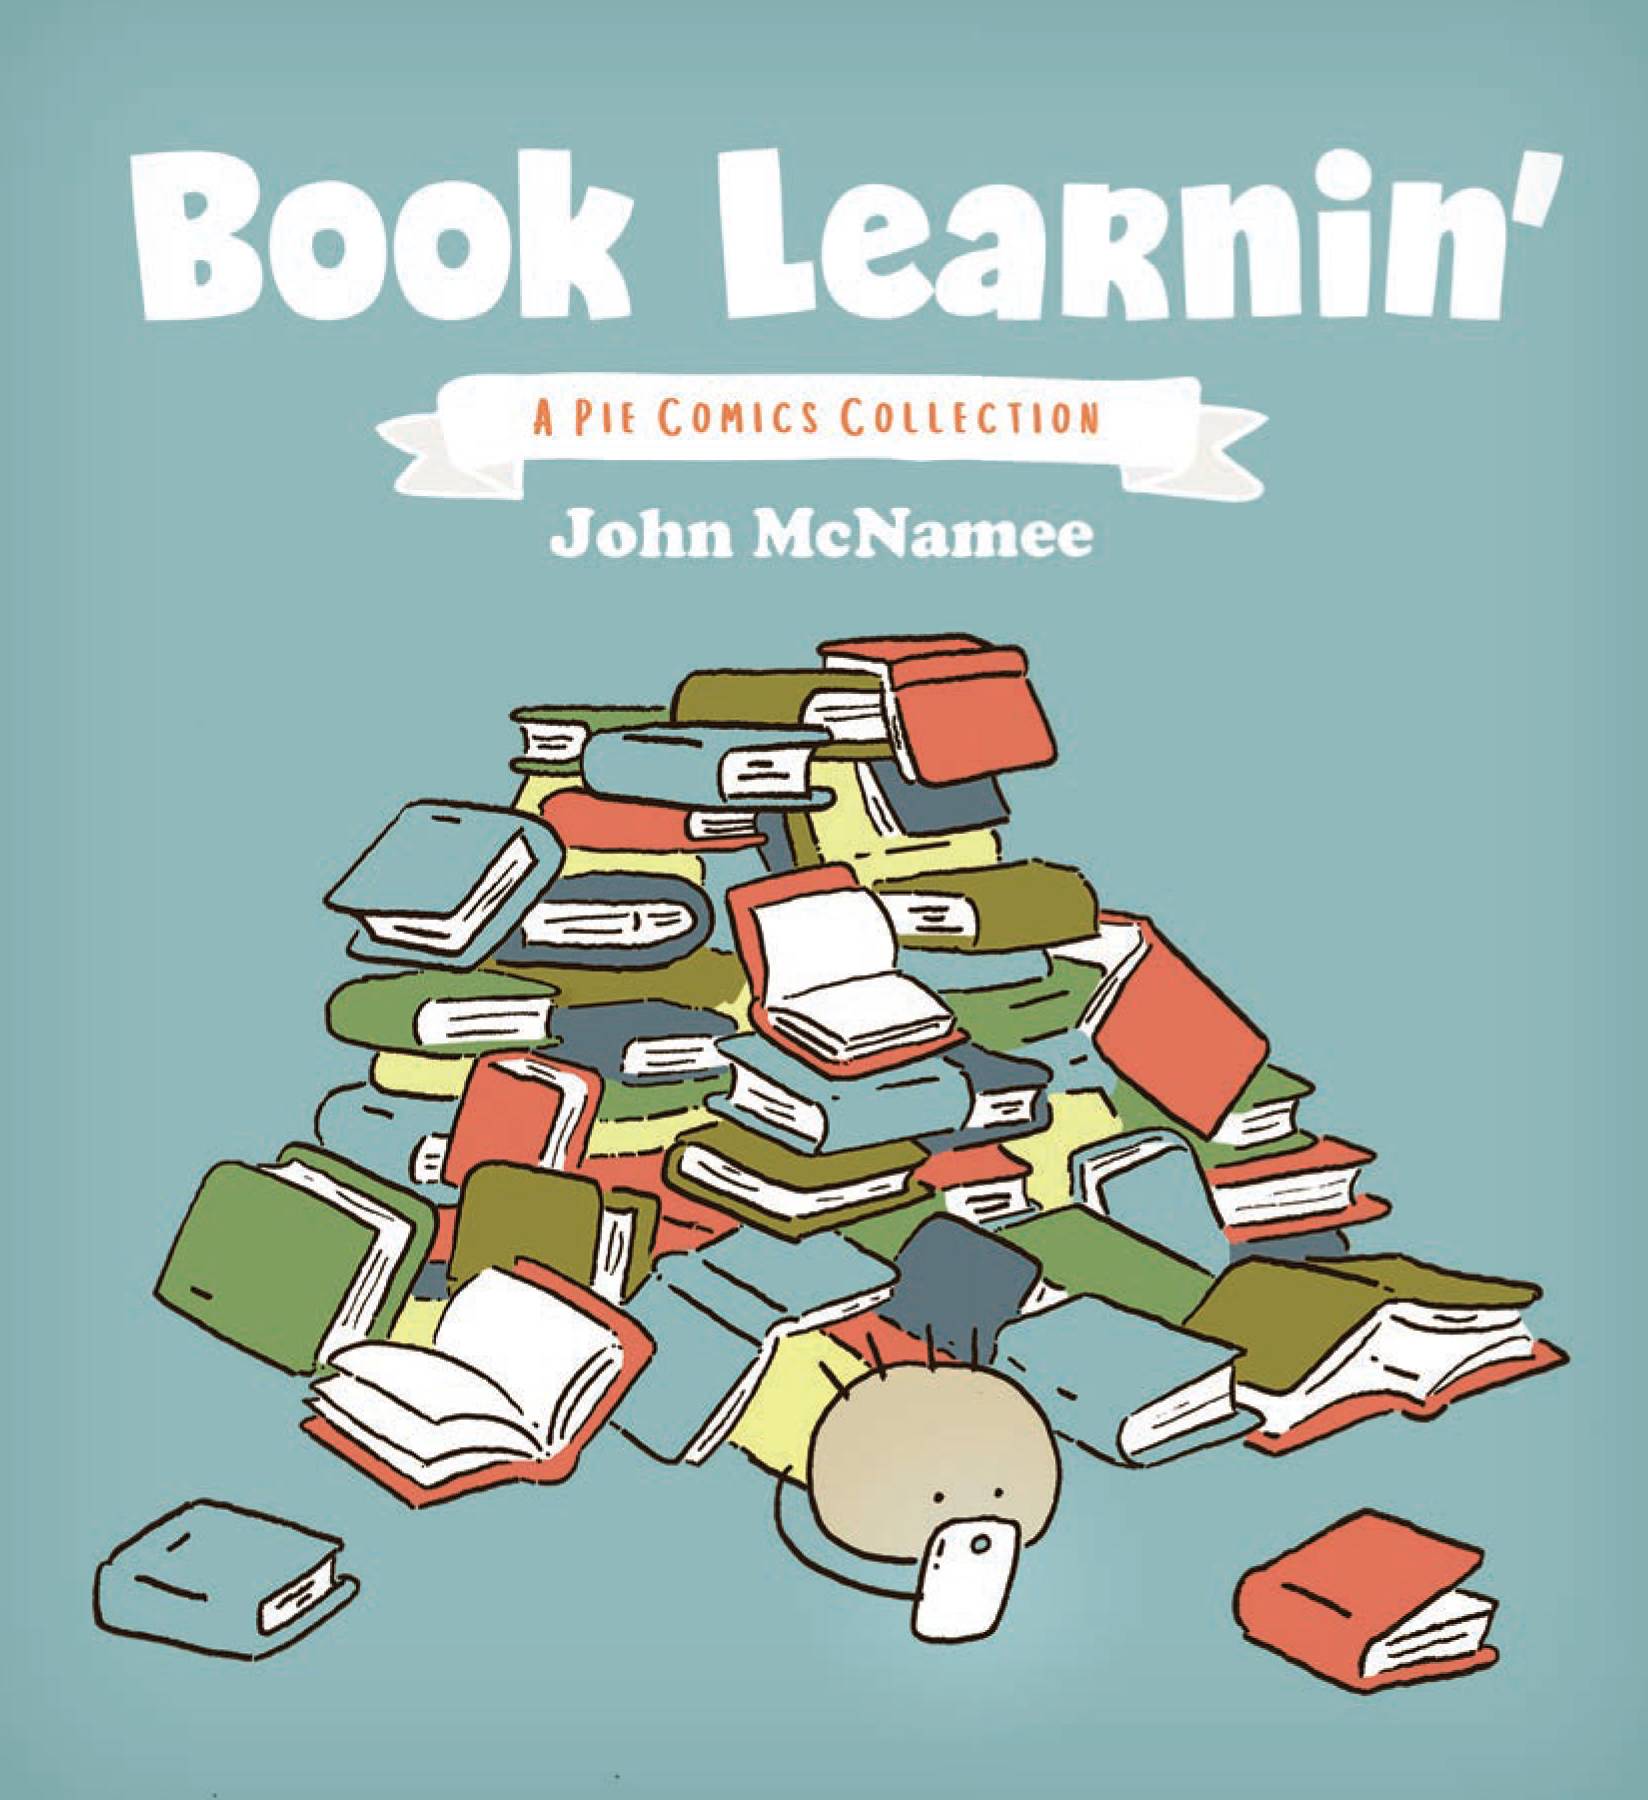 Book Learnin Pie Comics Collected Graphic Novel